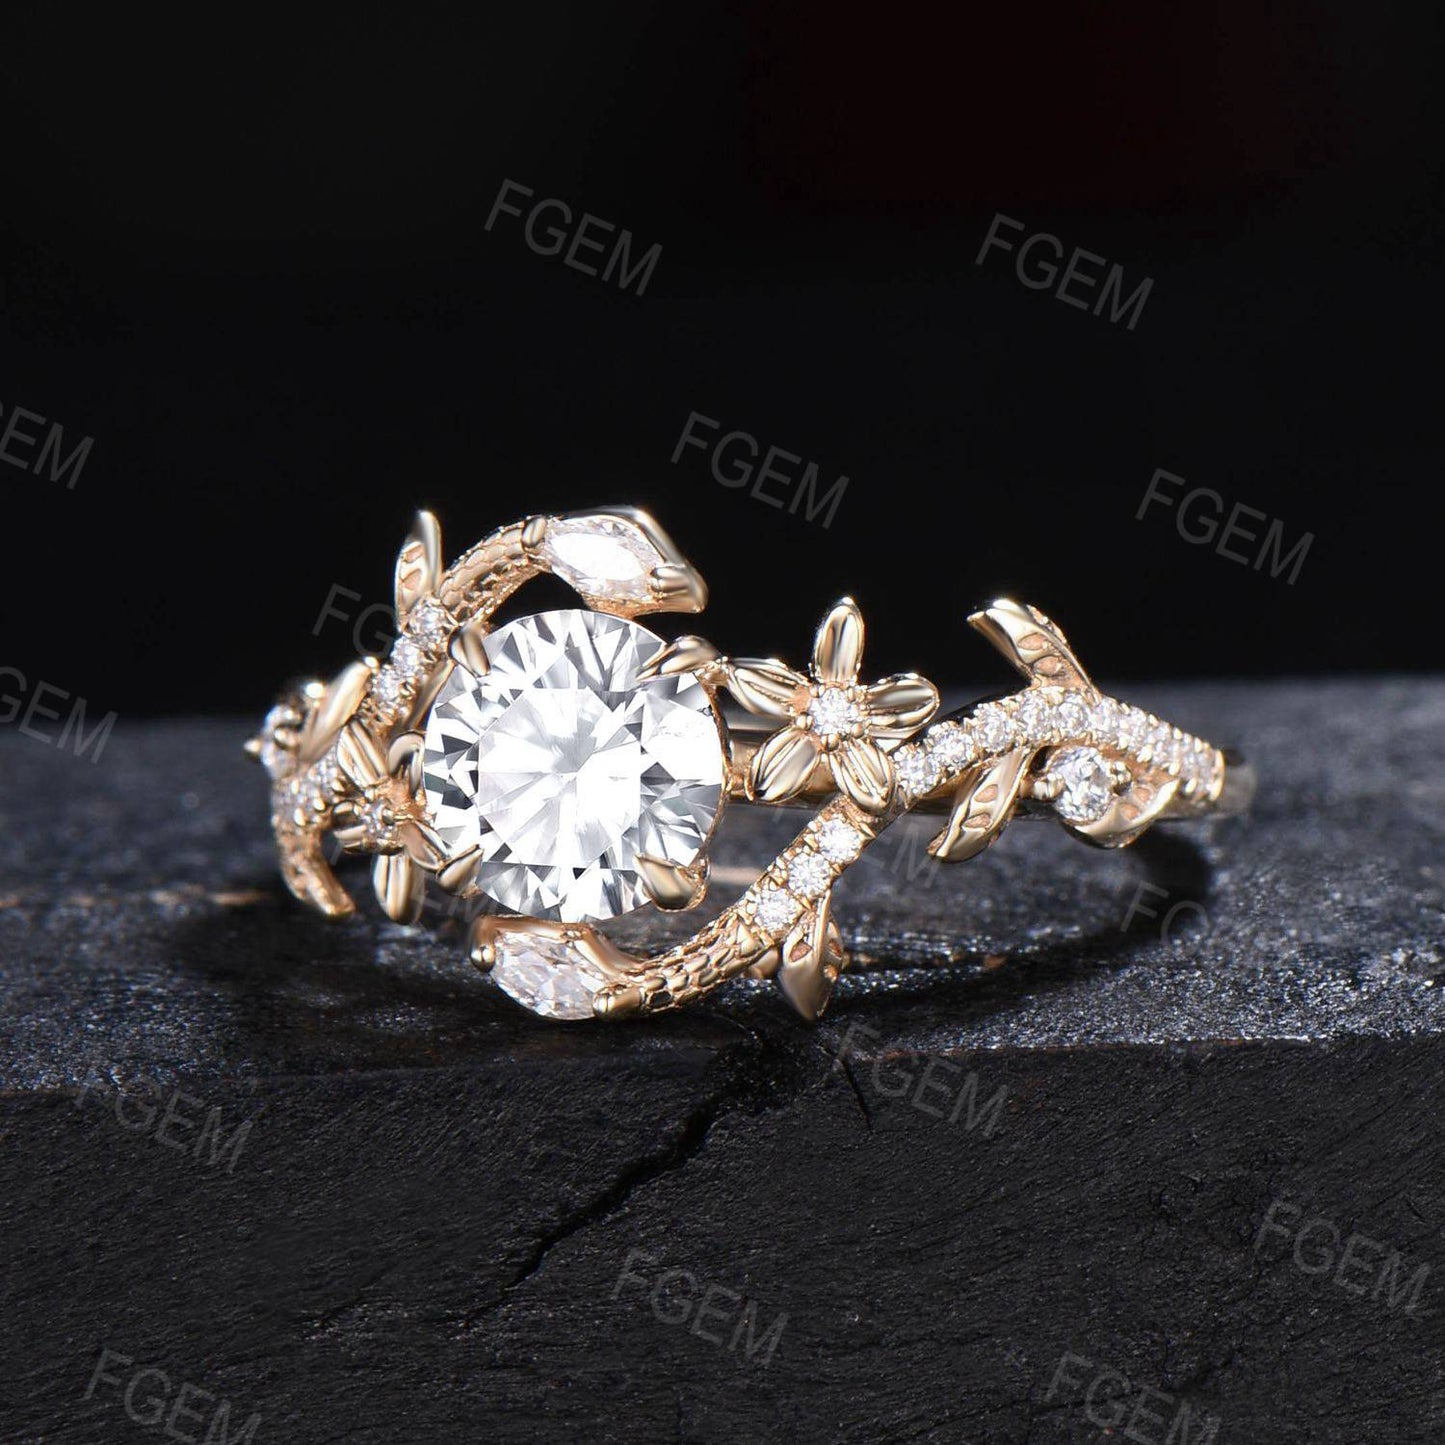 Gold Snake Ring 1ct Floral Round Moissanite Engagement Ring Nature Style Leaf Vine Moissanite Wedding Ring Antique Serpent Ring Promise Gift